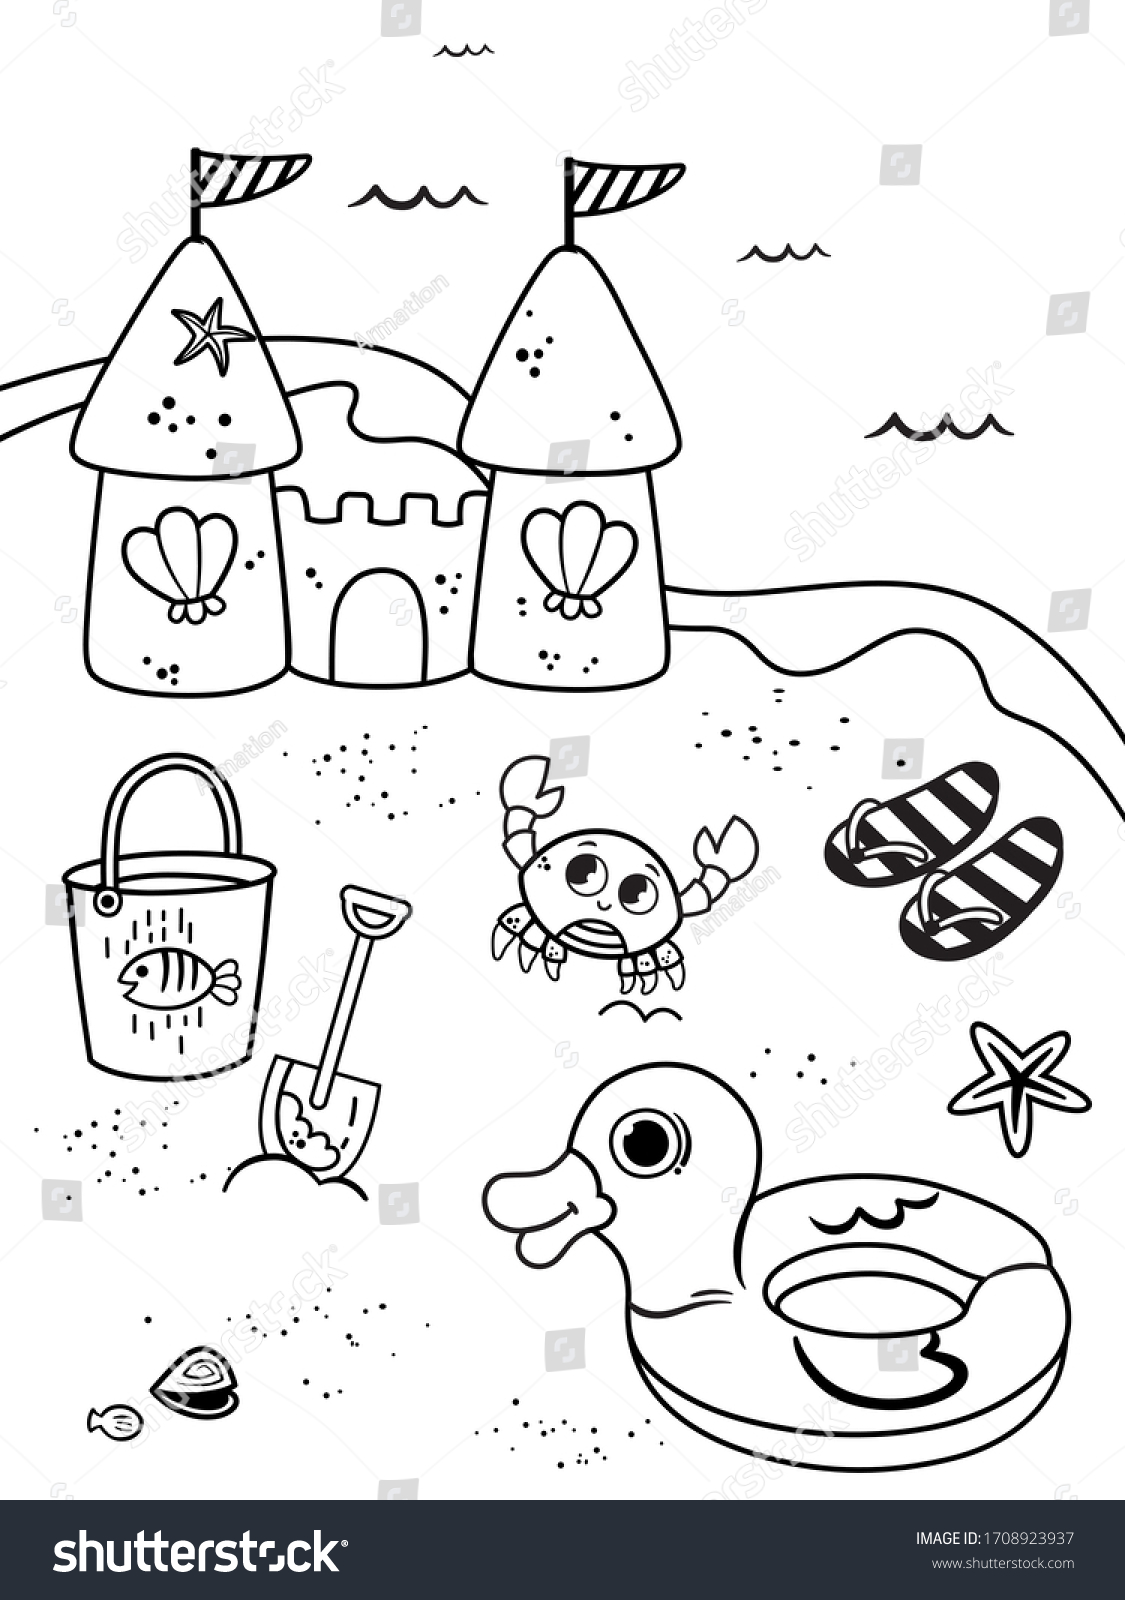 SVG of Coloring Page For Kids In Beach Theme. Vector Illustration. svg